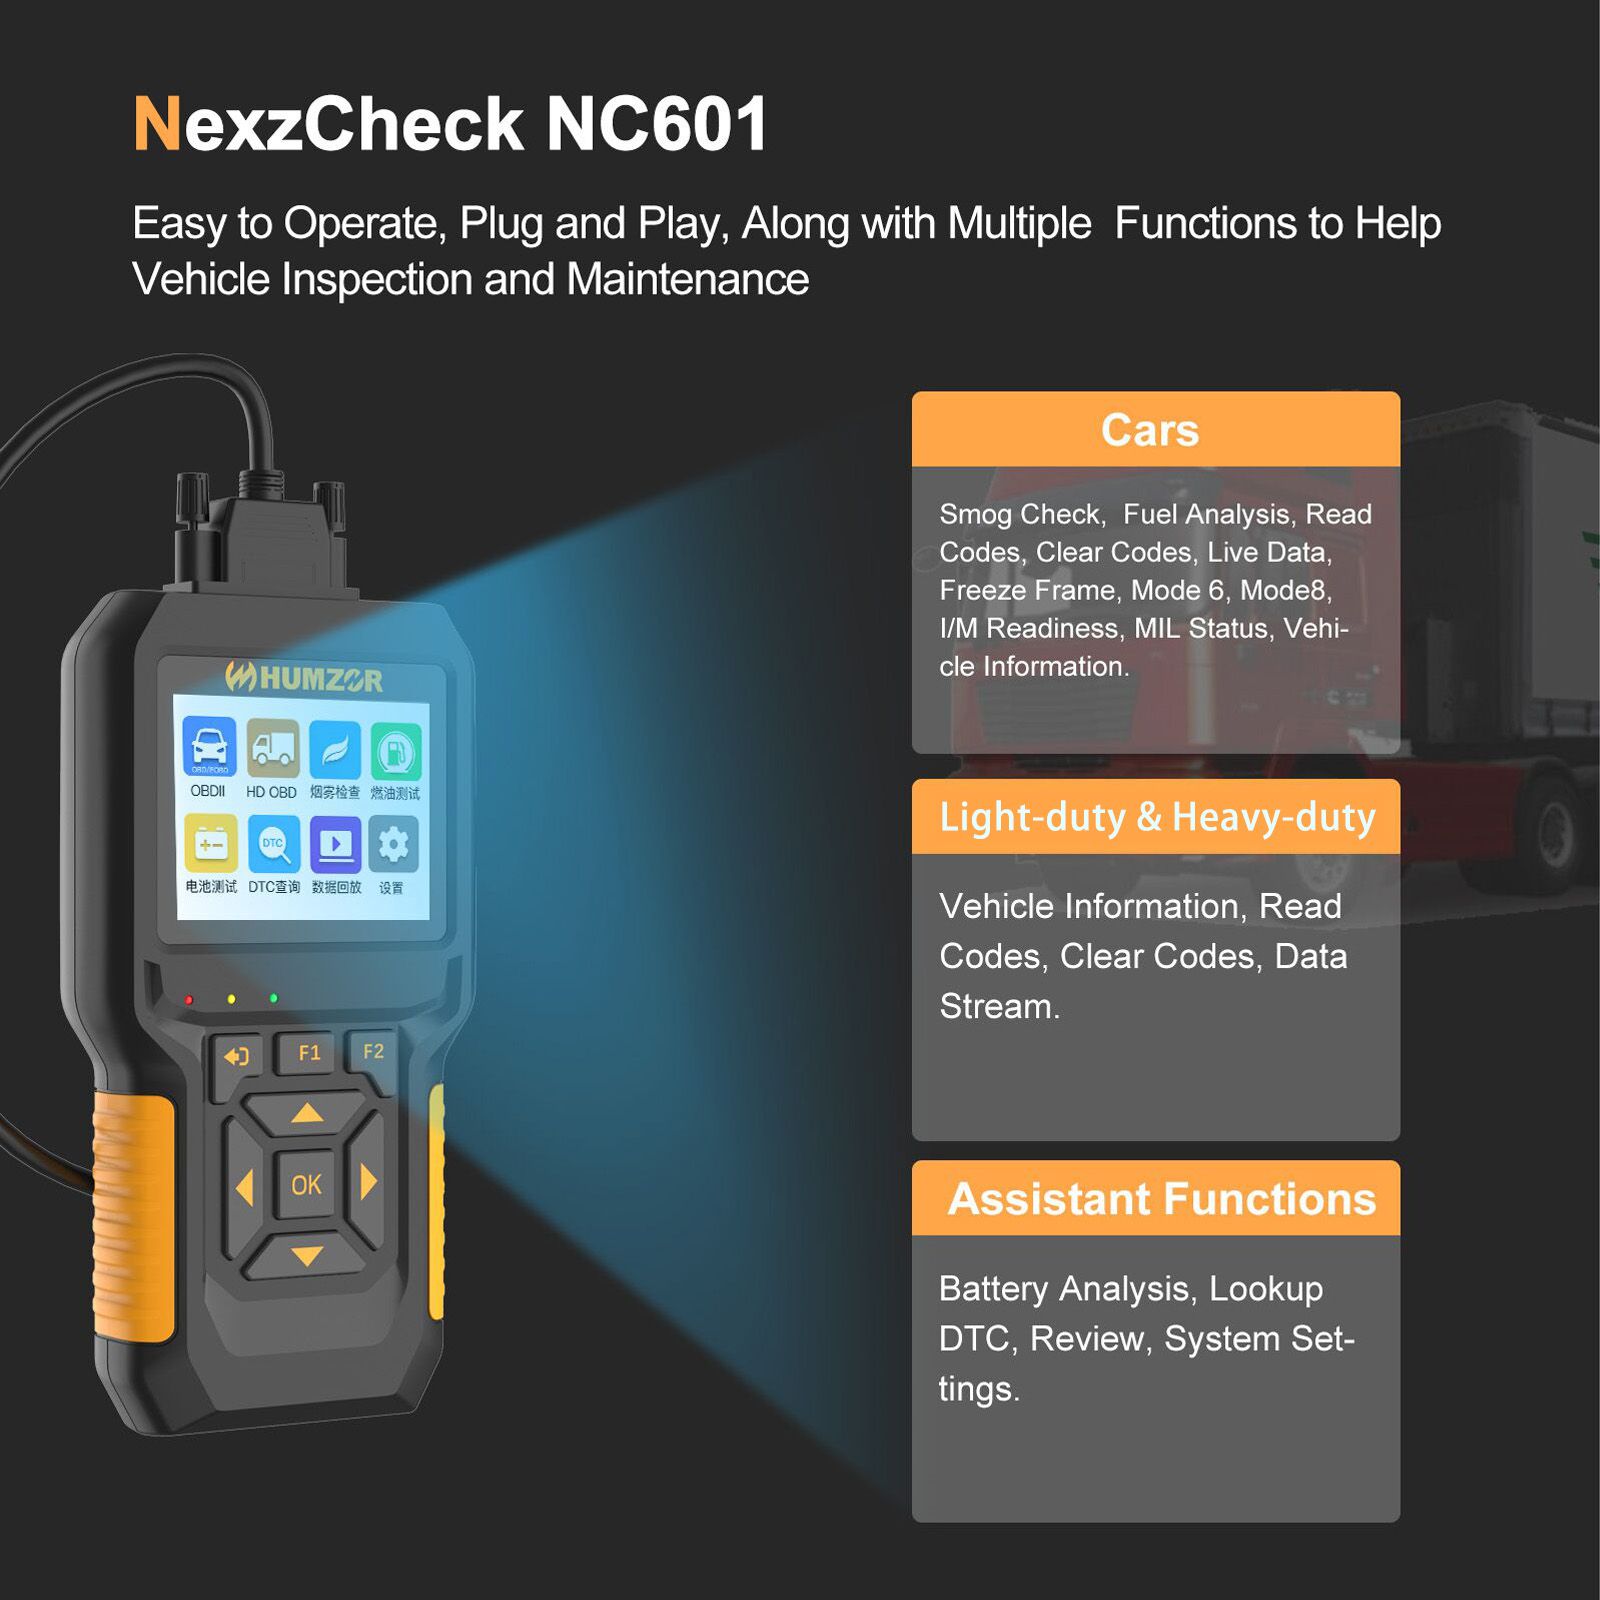 HUMZOR NexzCheck NC601 for Diesel and Gasoline I/M Readiness, MIL Status Analysis, Smog Check, Fuel Analysis, Battery Analysis, Live Data, Freeze Data